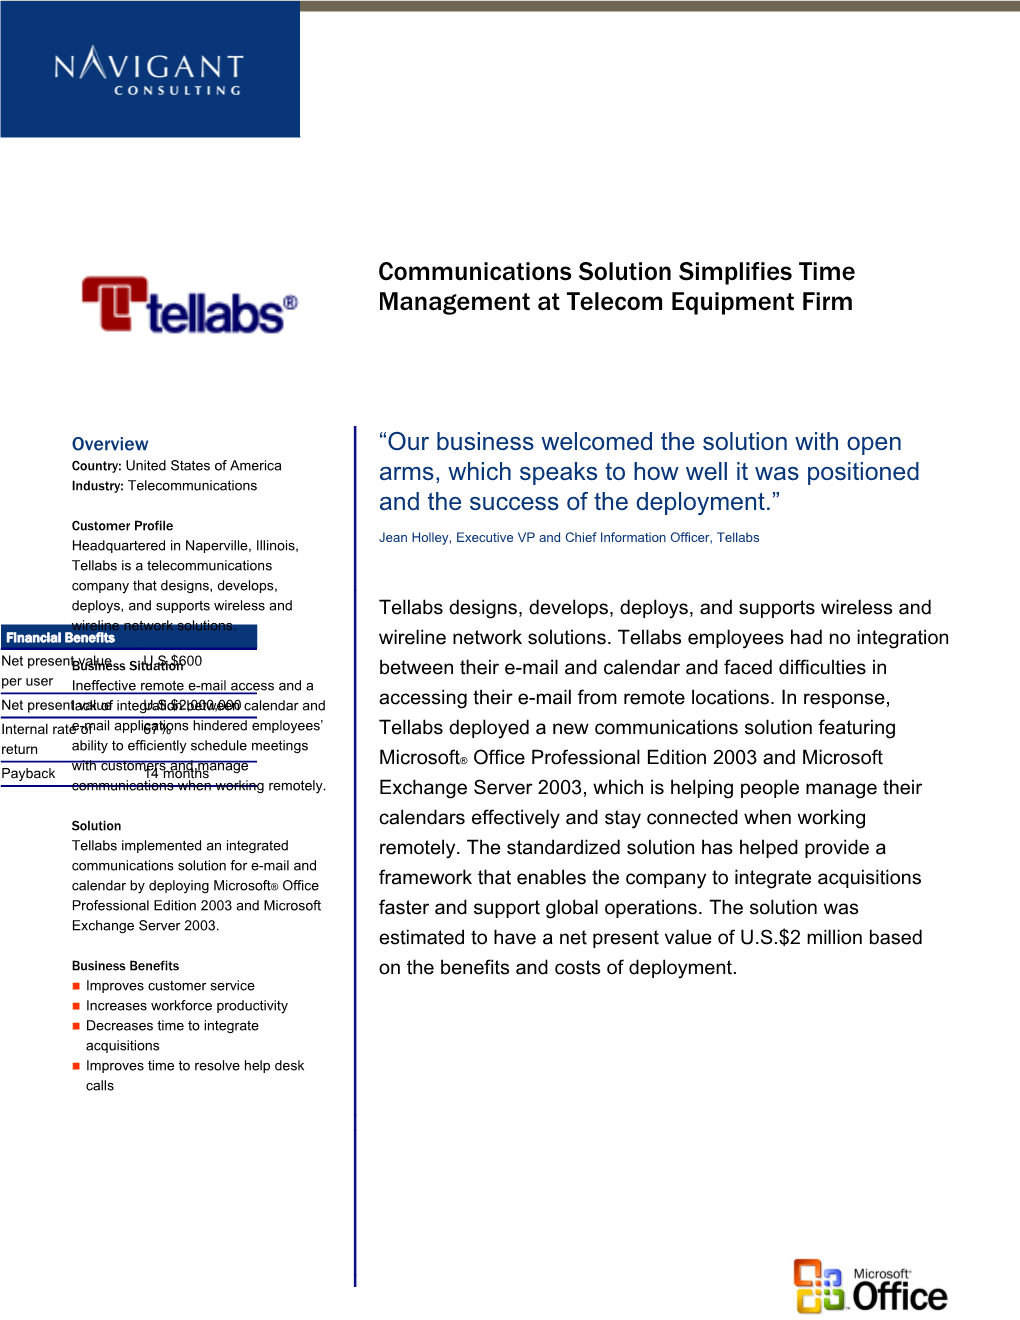 Communications Solution Simplifies Time Management at Telecom Equipment Firm